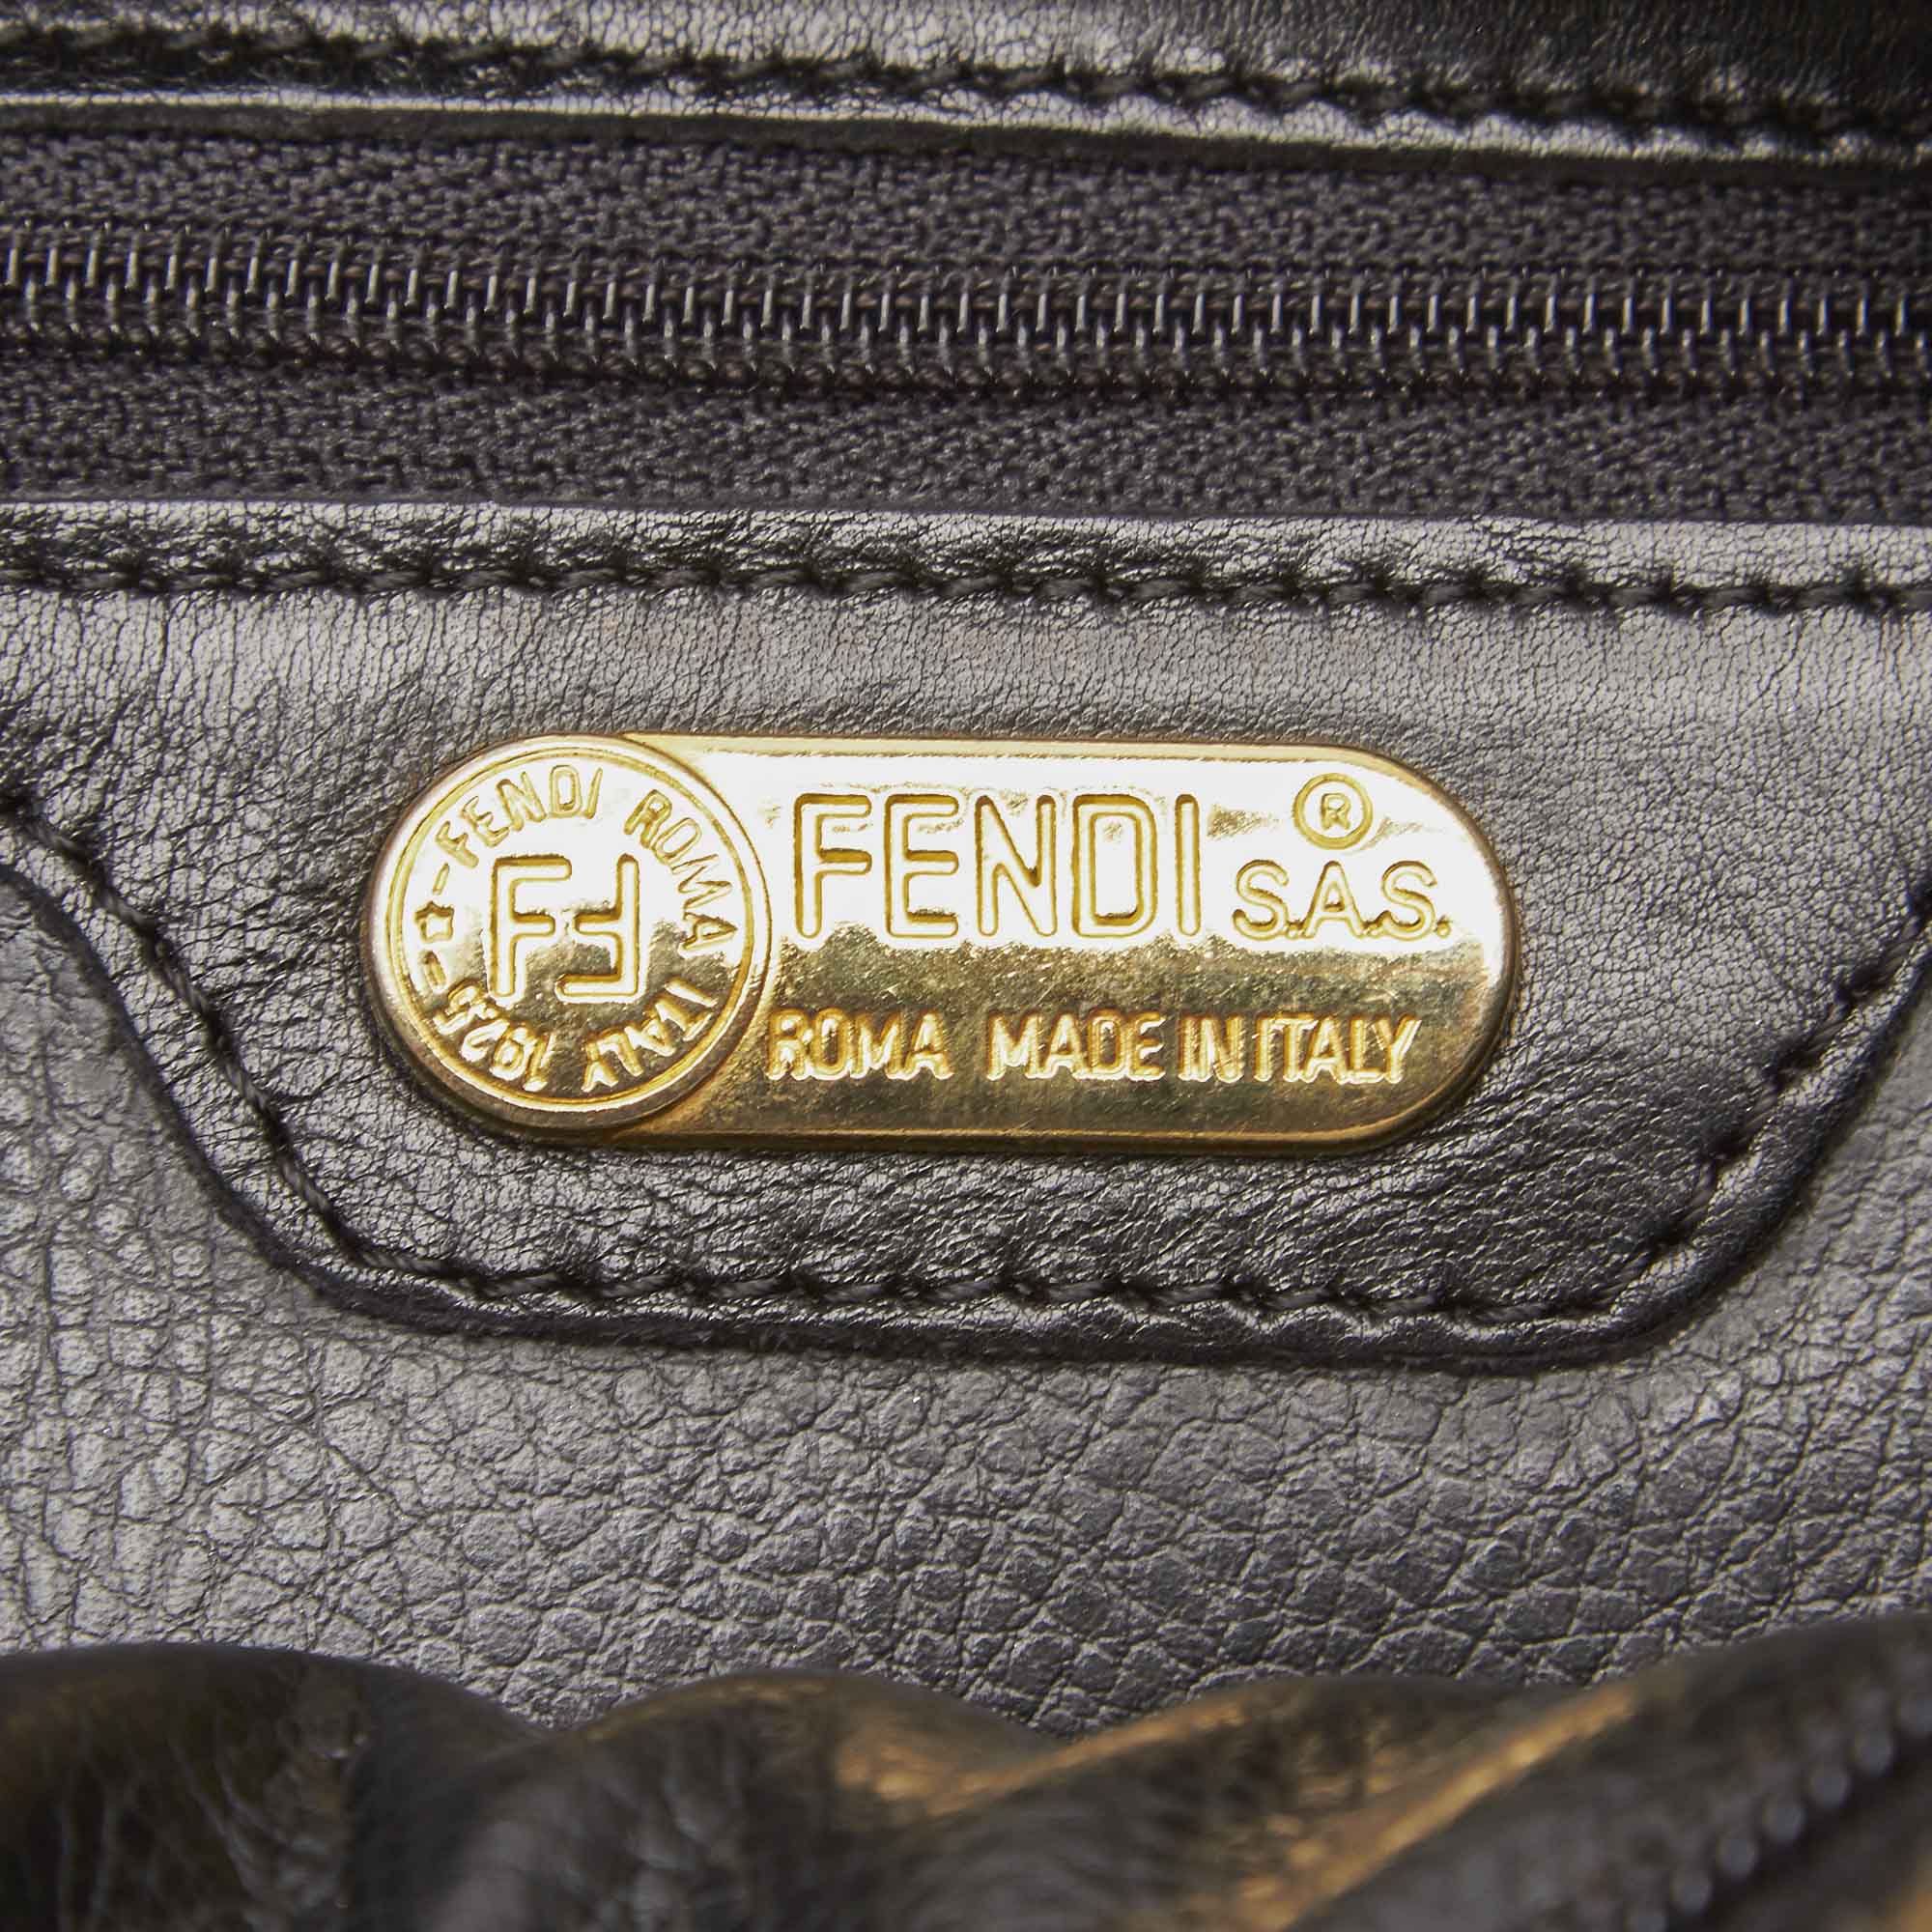 Fendi Quilted Leather Tote Bag, this tote bag features a quilted leather body, metal handles, a - Image 8 of 11